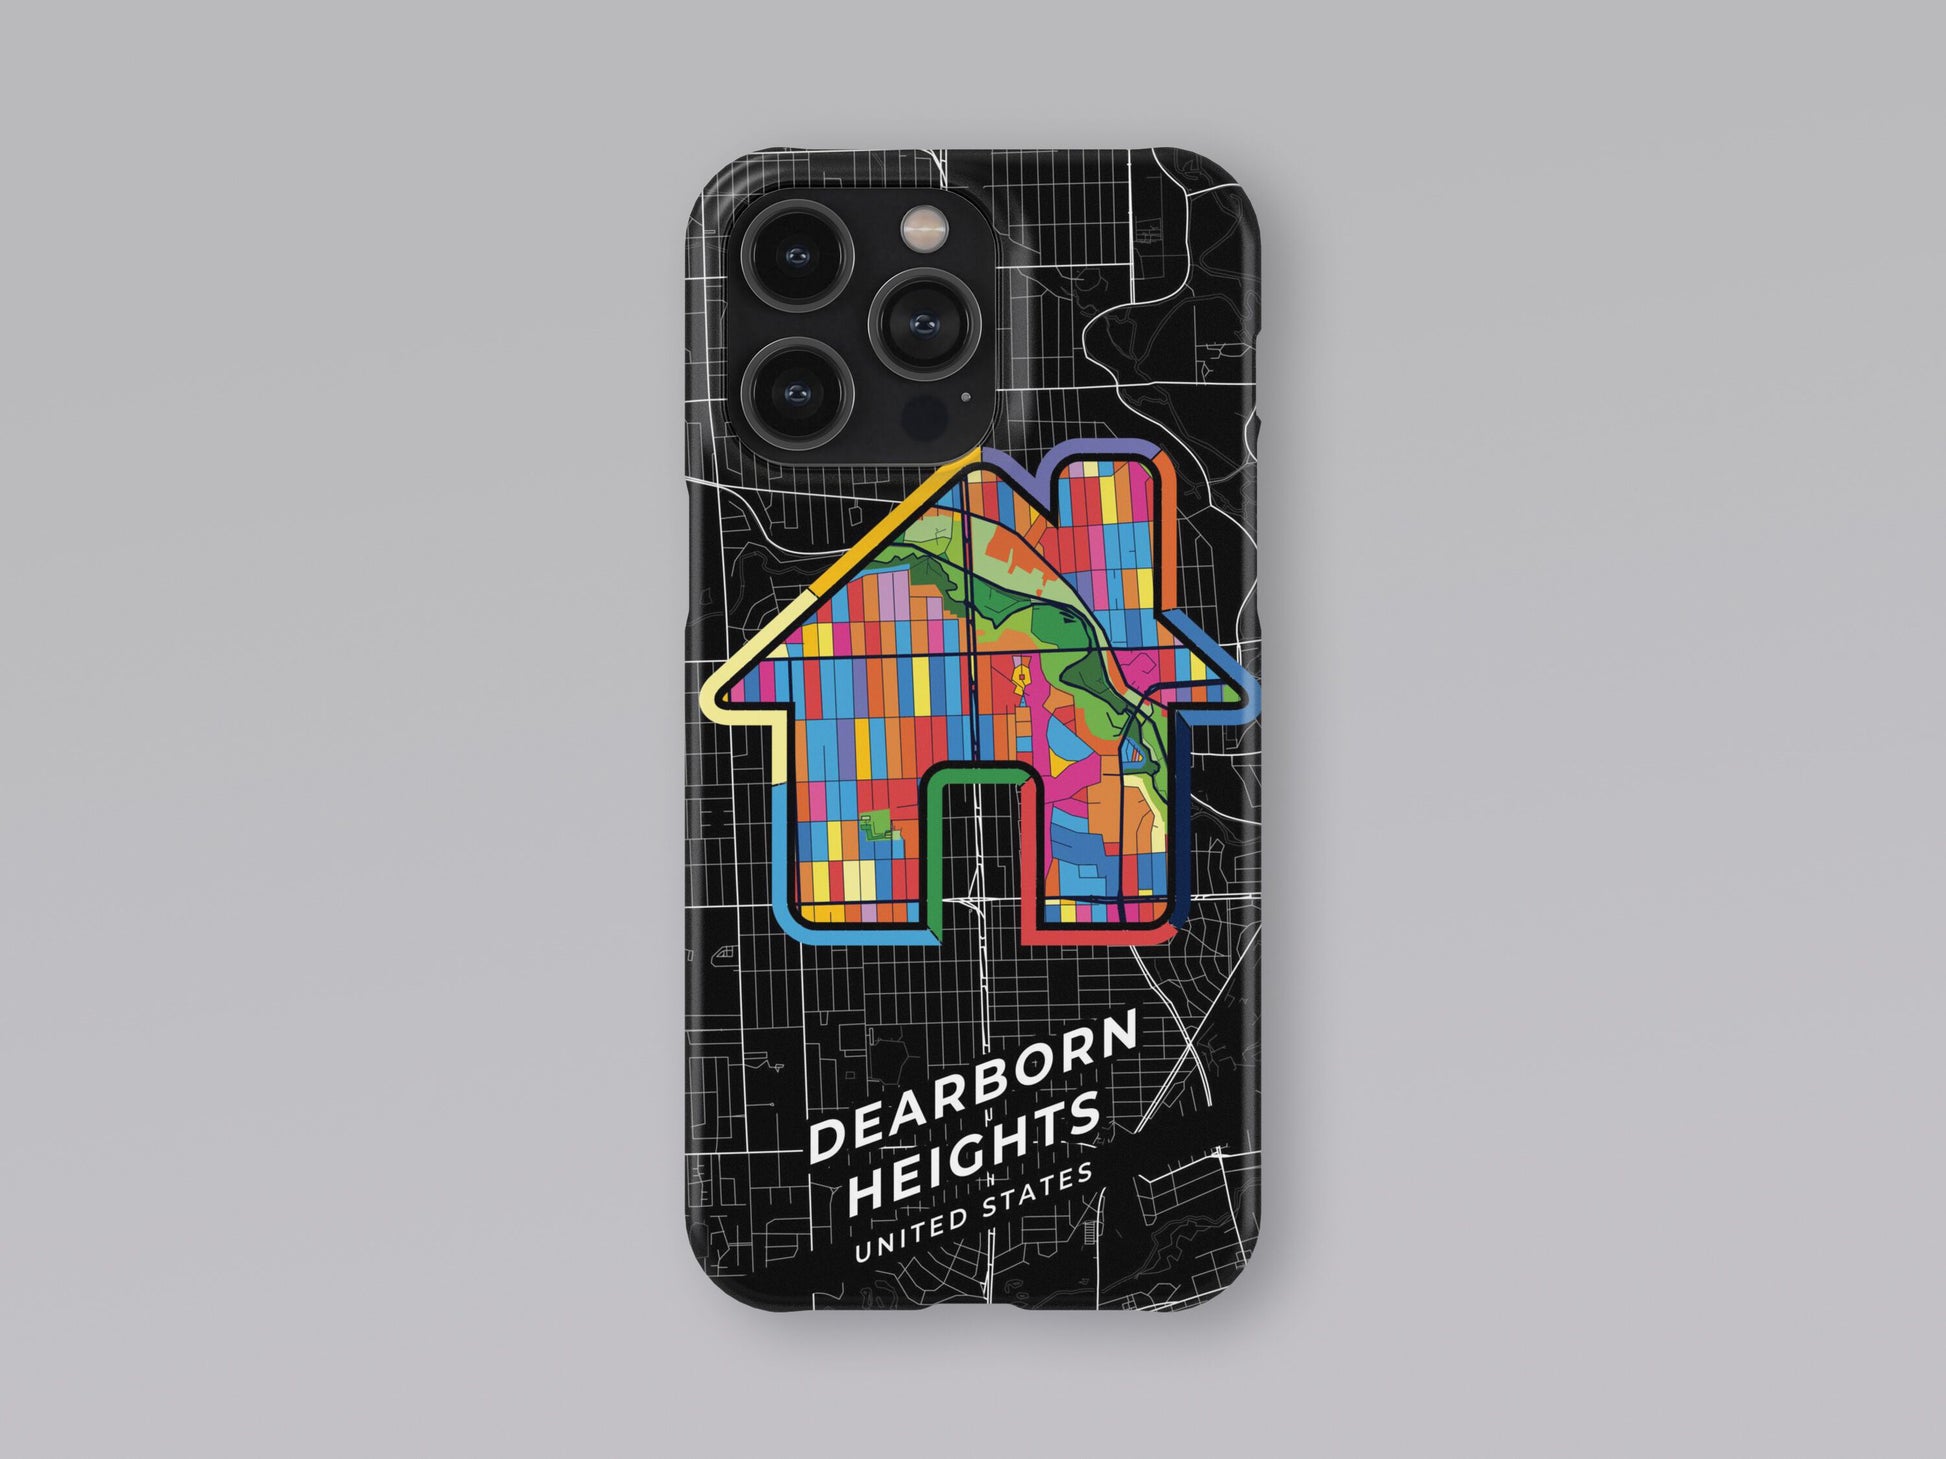 Dearborn Heights Michigan slim phone case with colorful icon. Birthday, wedding or housewarming gift. Couple match cases. 3